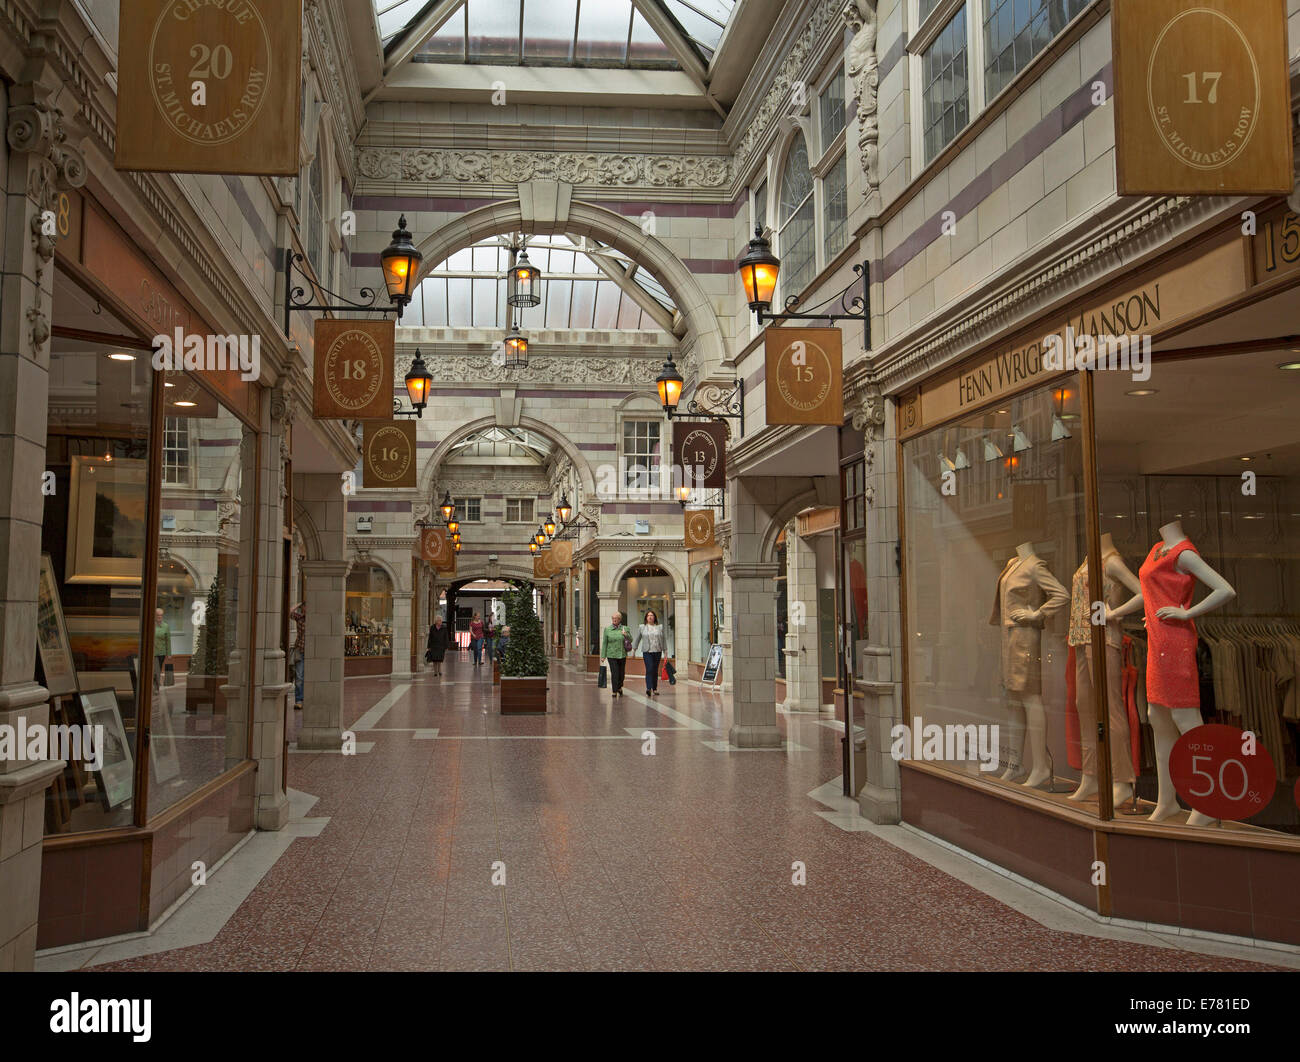 Interior of elegant and historic shopping arcade with high glass ceiling, decorative carvings on stone walls in city of Chester Stock Photo